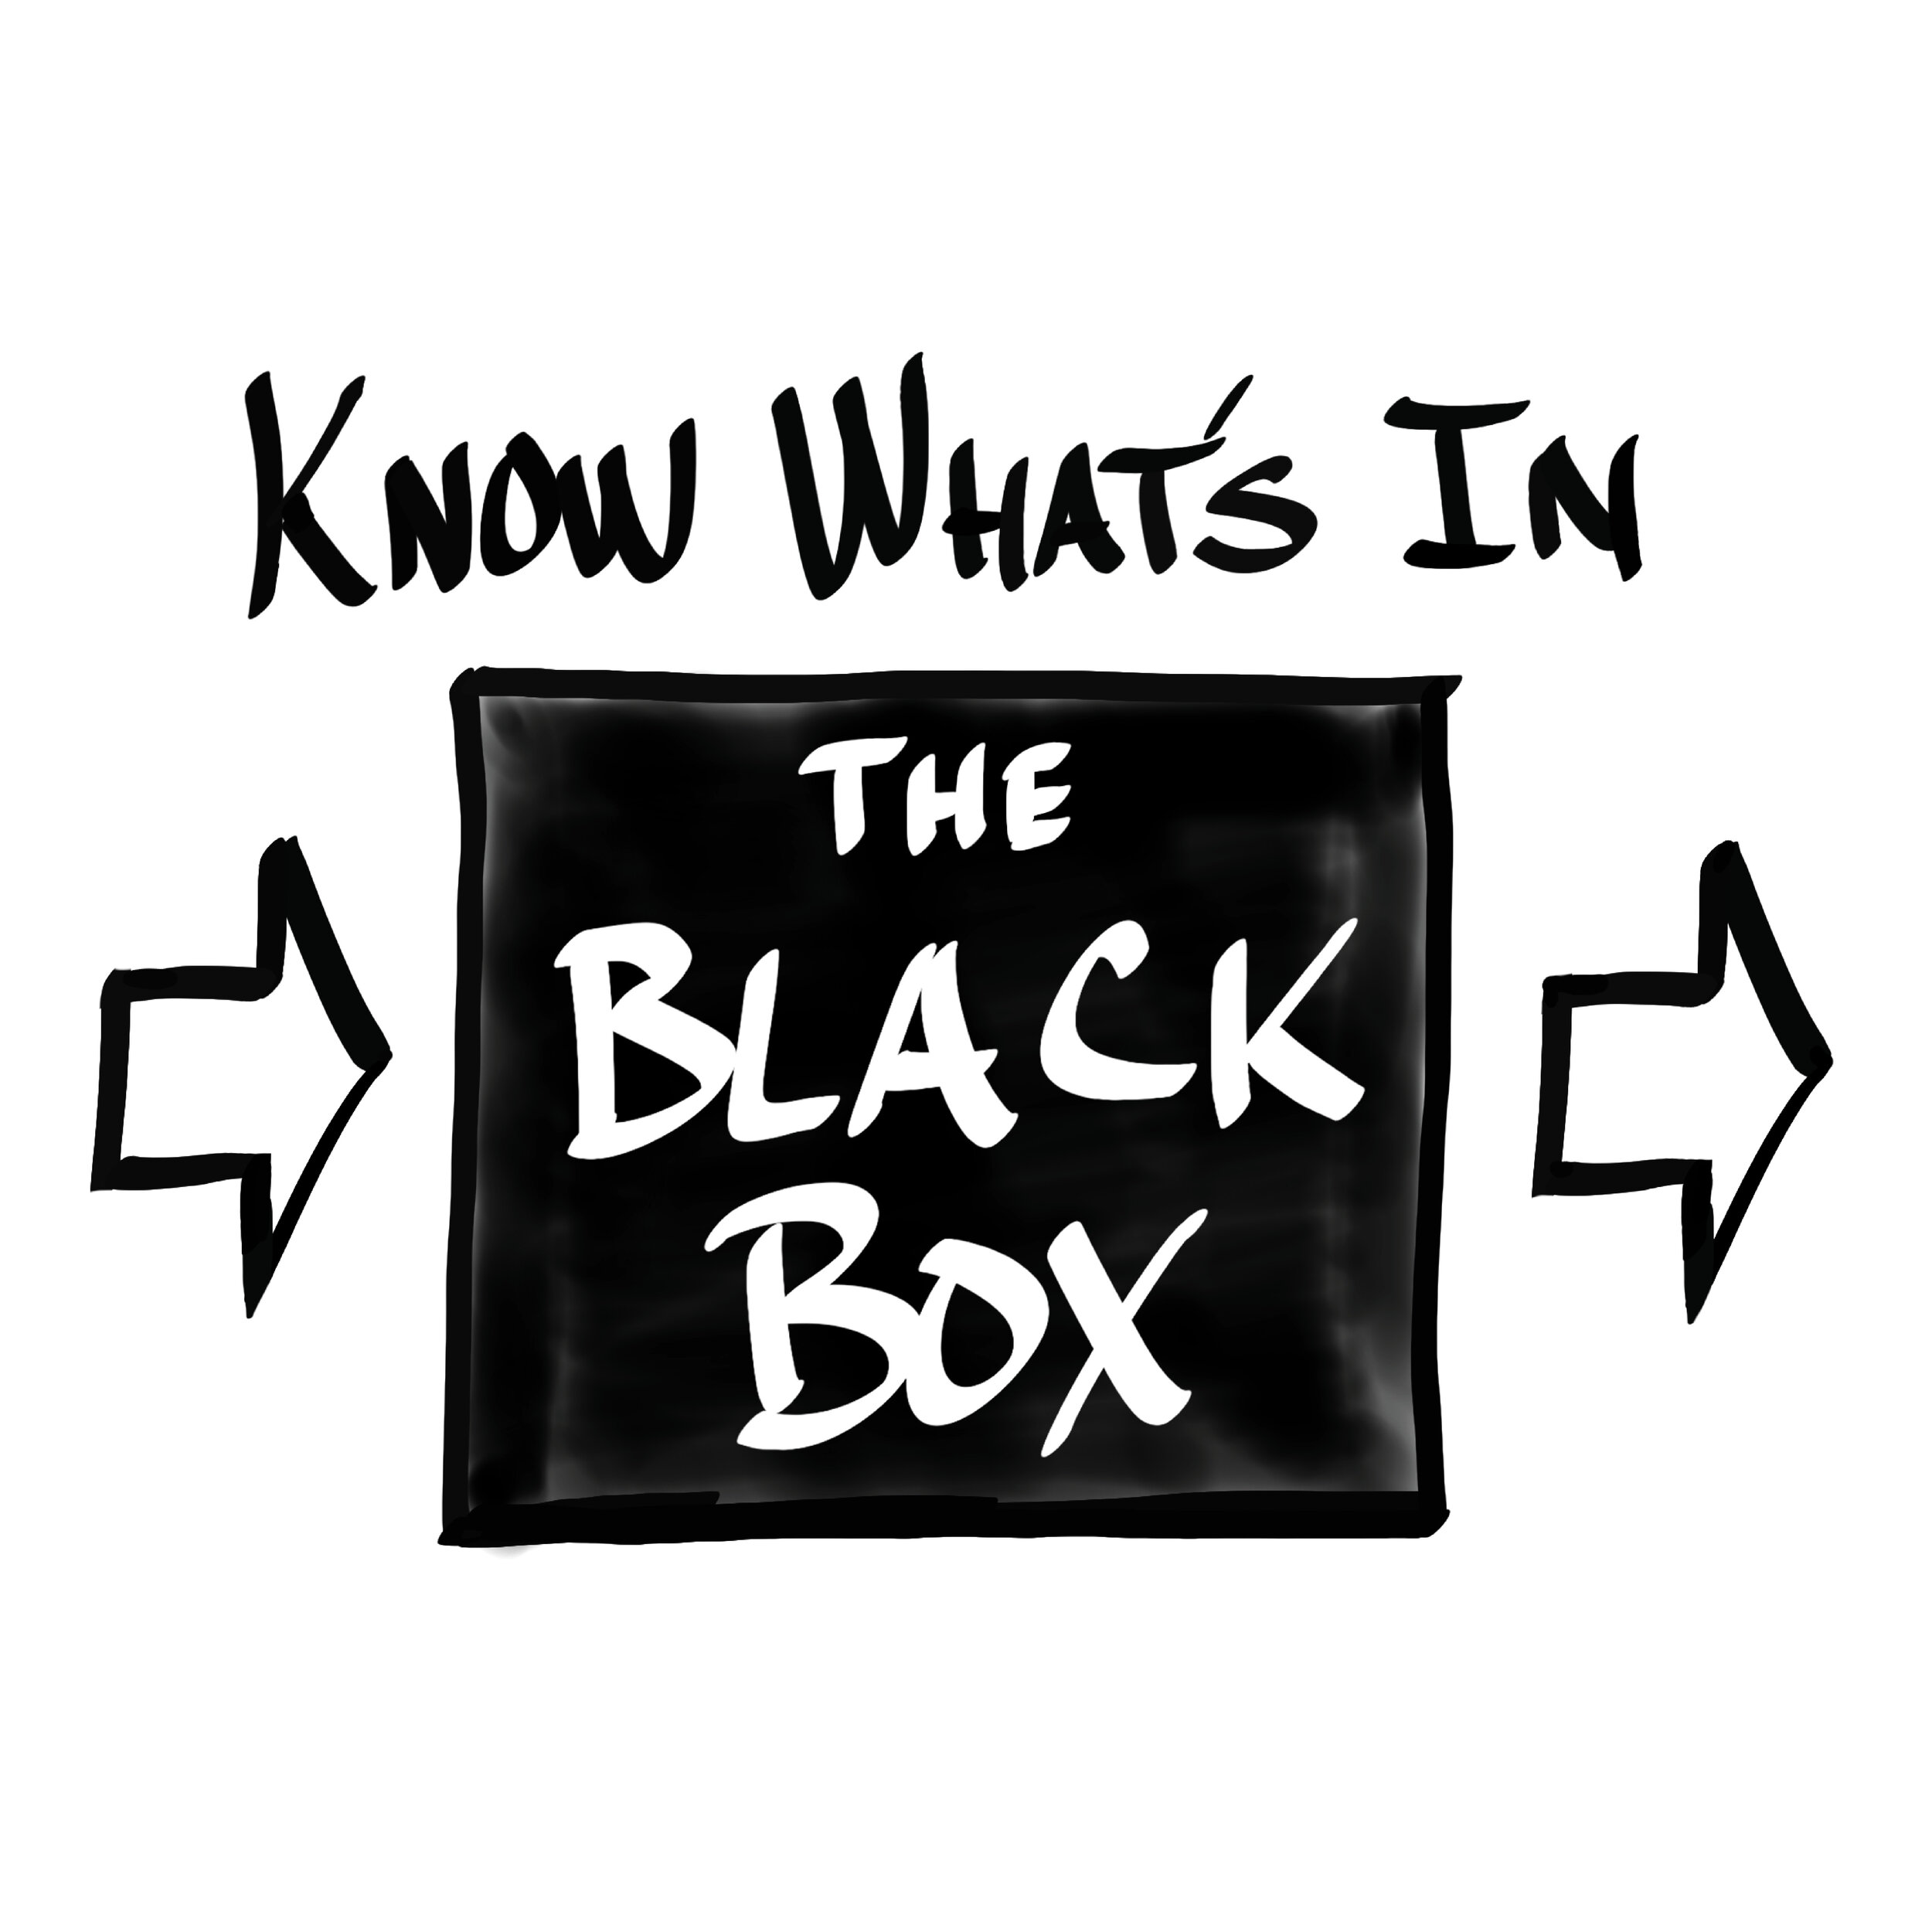 Know whats in the black box (1).jpg